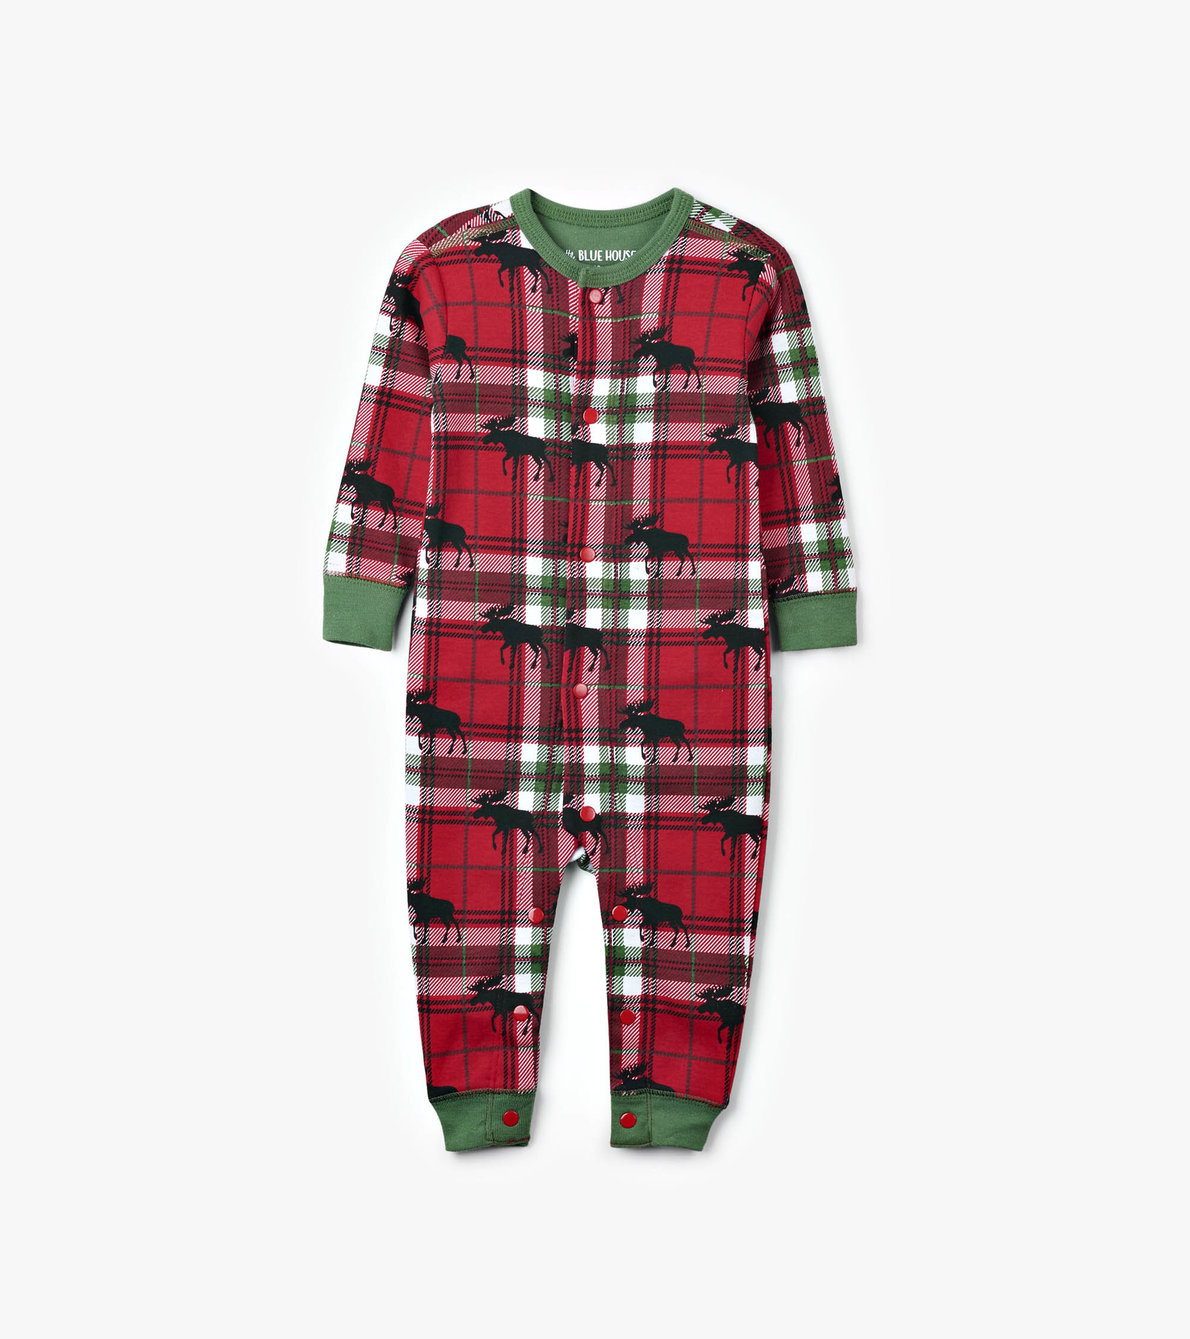 View larger image of Holiday Moose on Plaid Baby Union Suit